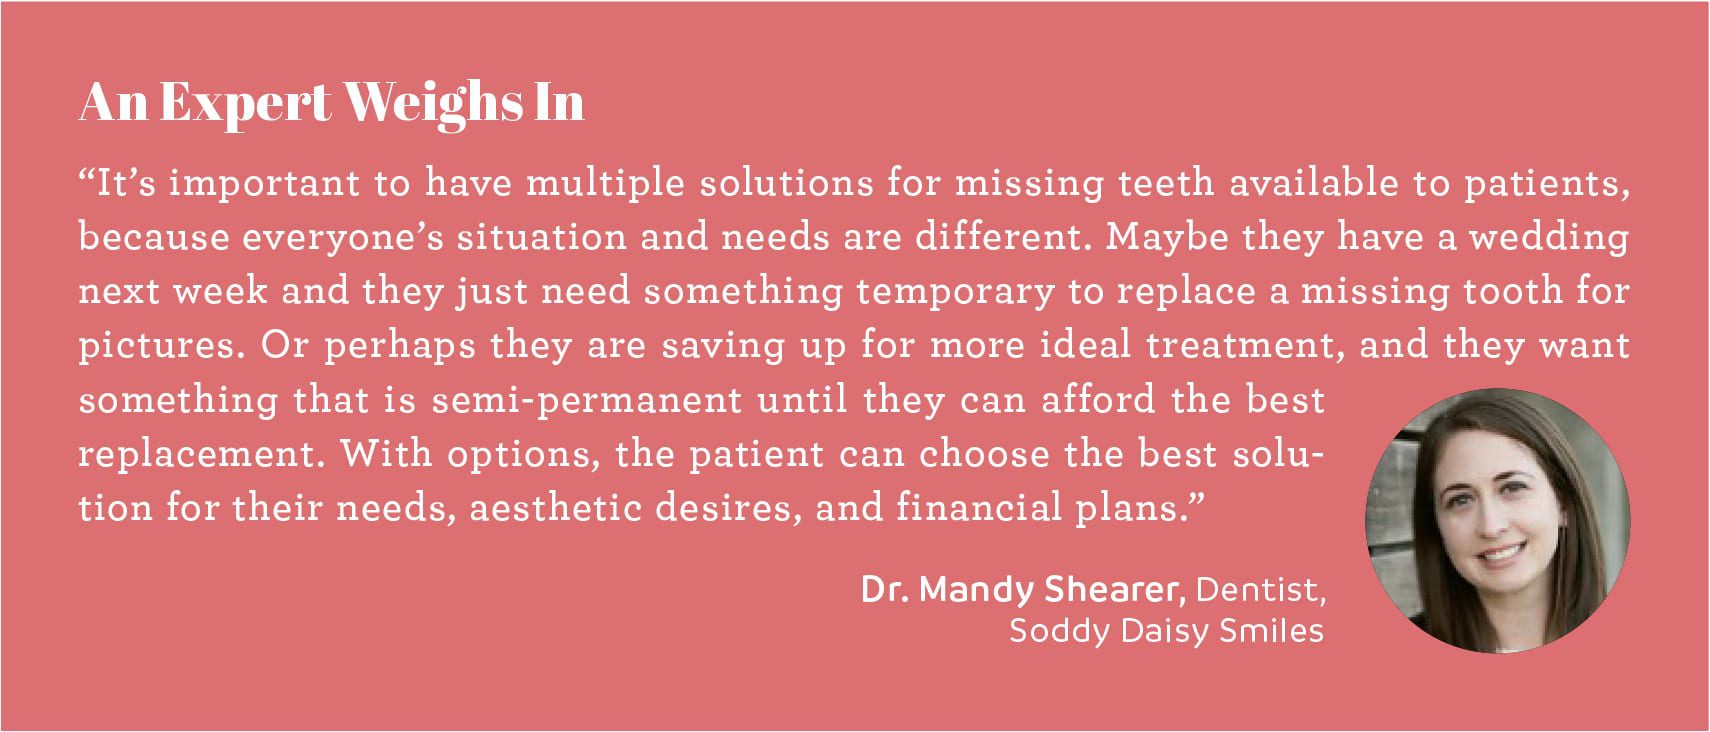 Expert opinion chattanooga doctor mandy shearer dentist soddy daisy smile chattanooga